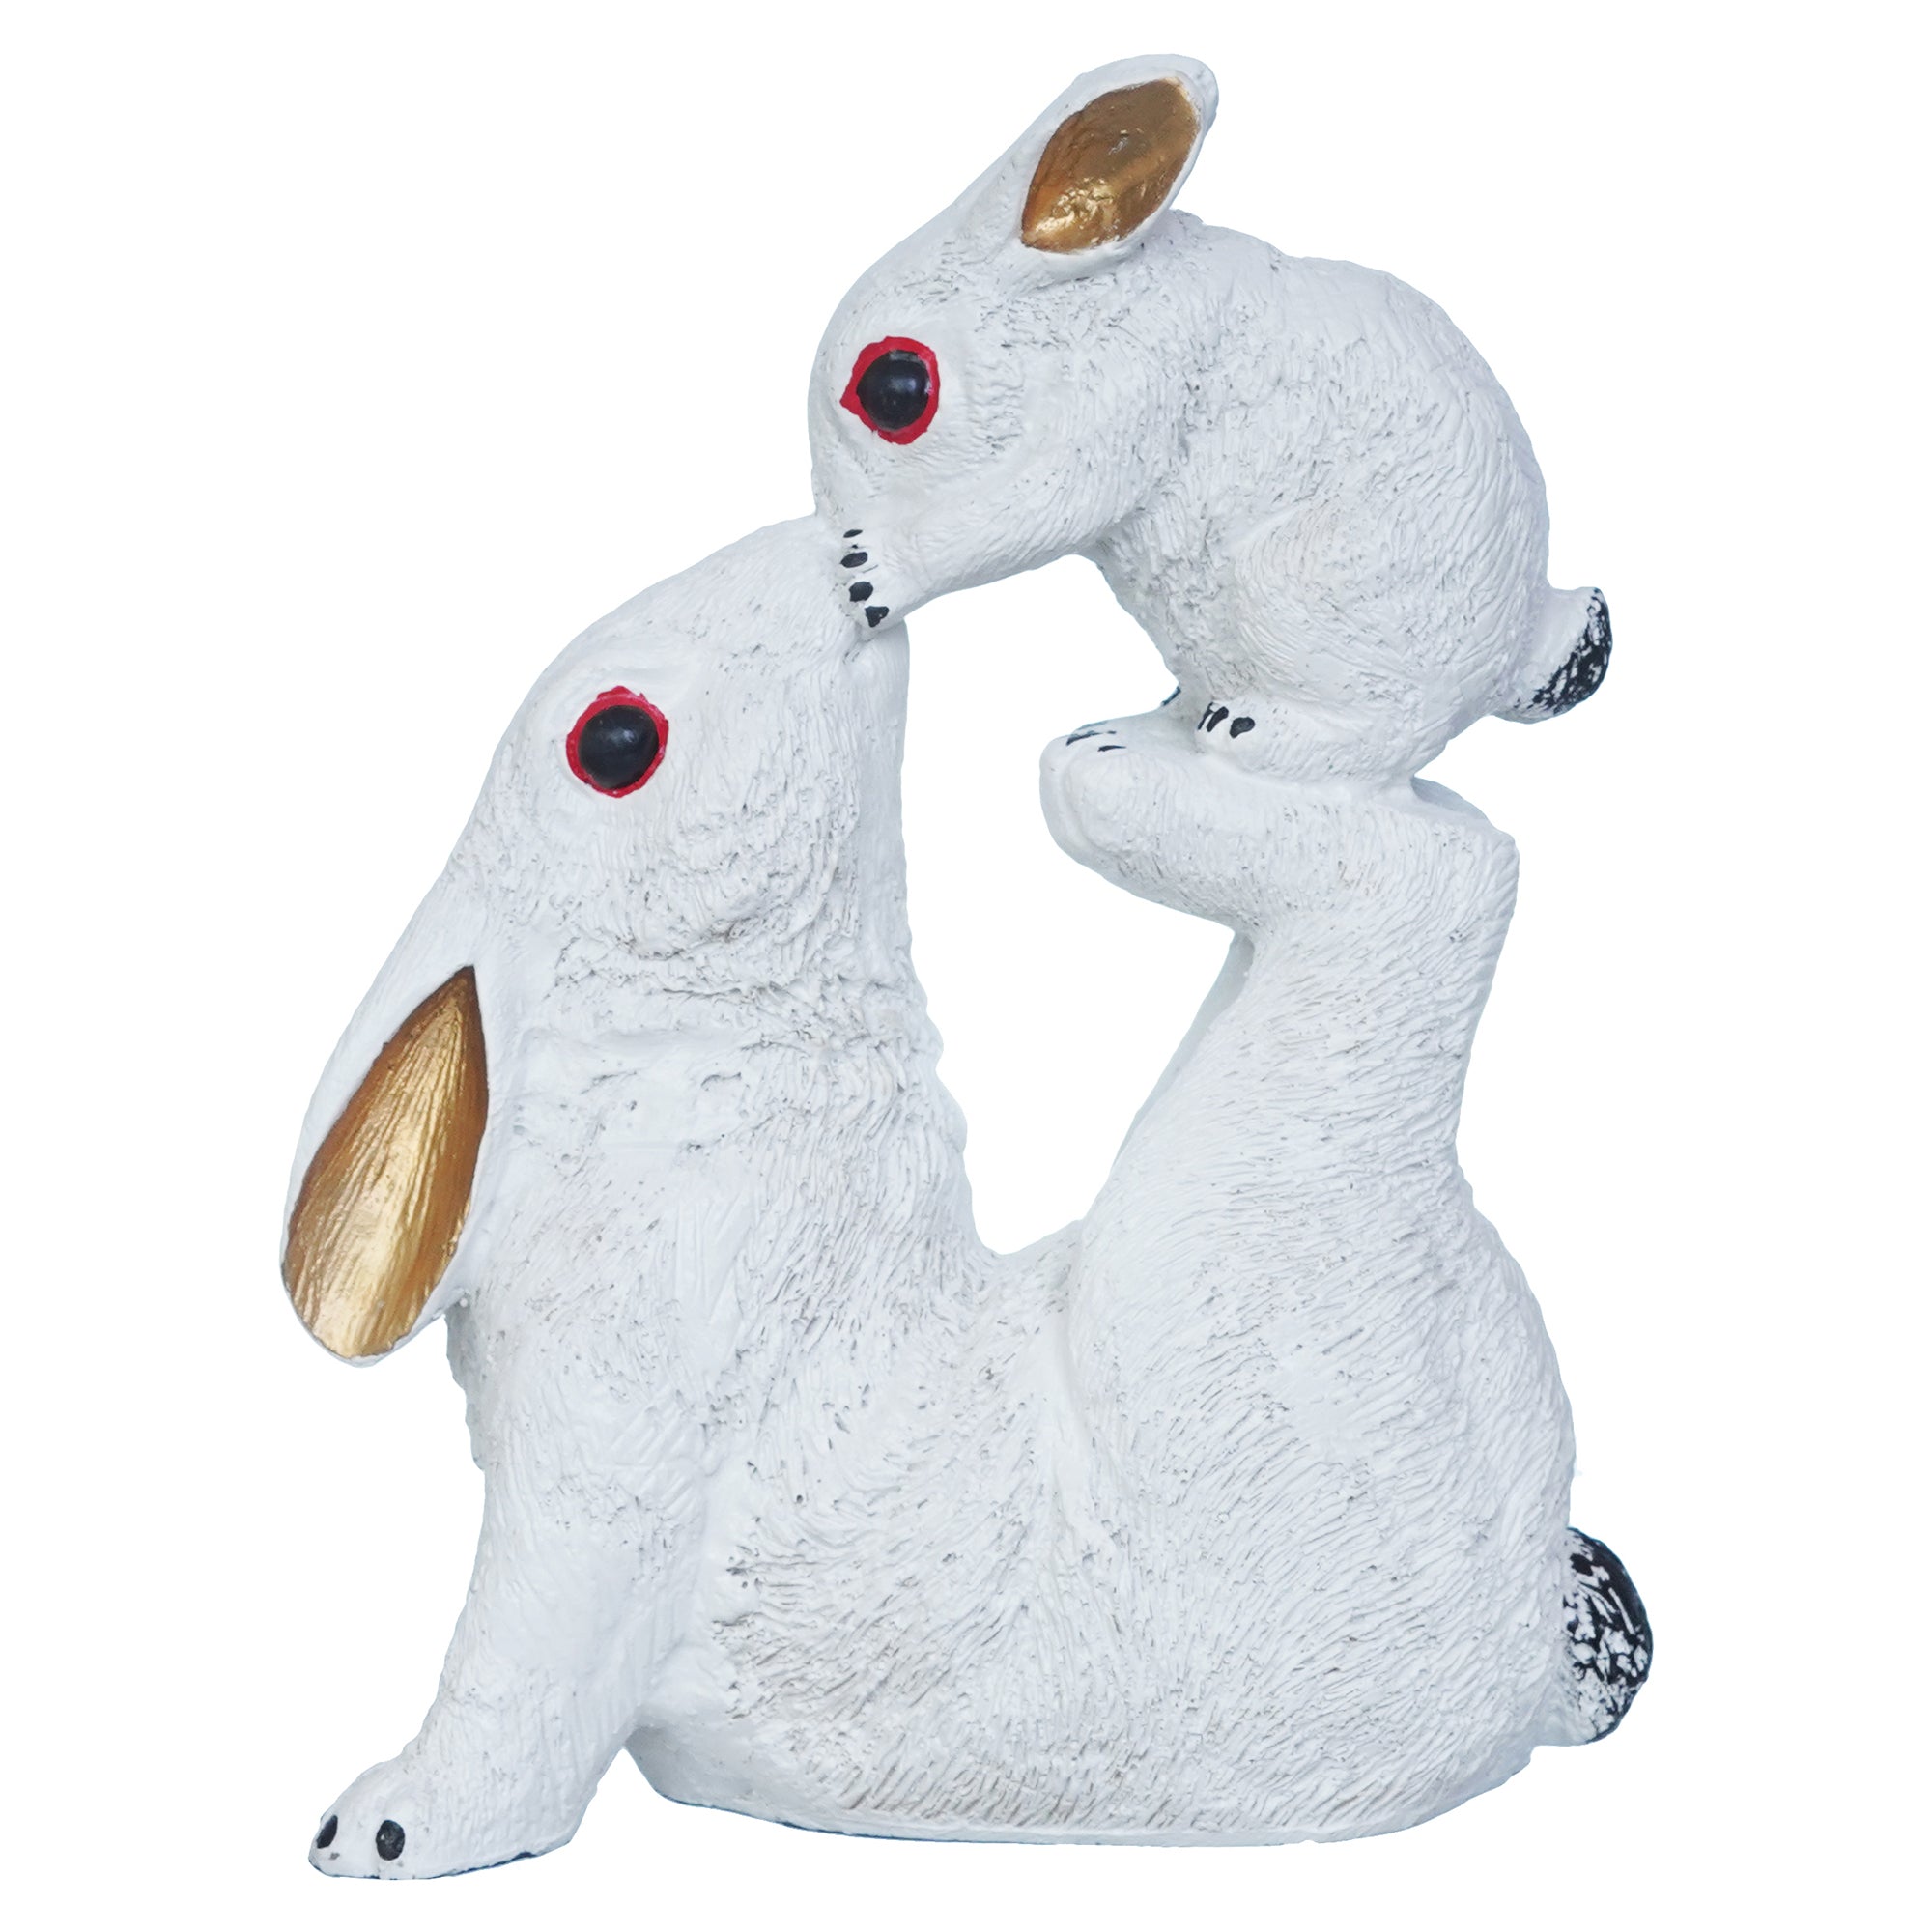 Gold and White Rabbit Statue with Bunny Animal Figurines Decorative Showpiece for Home Decor 6